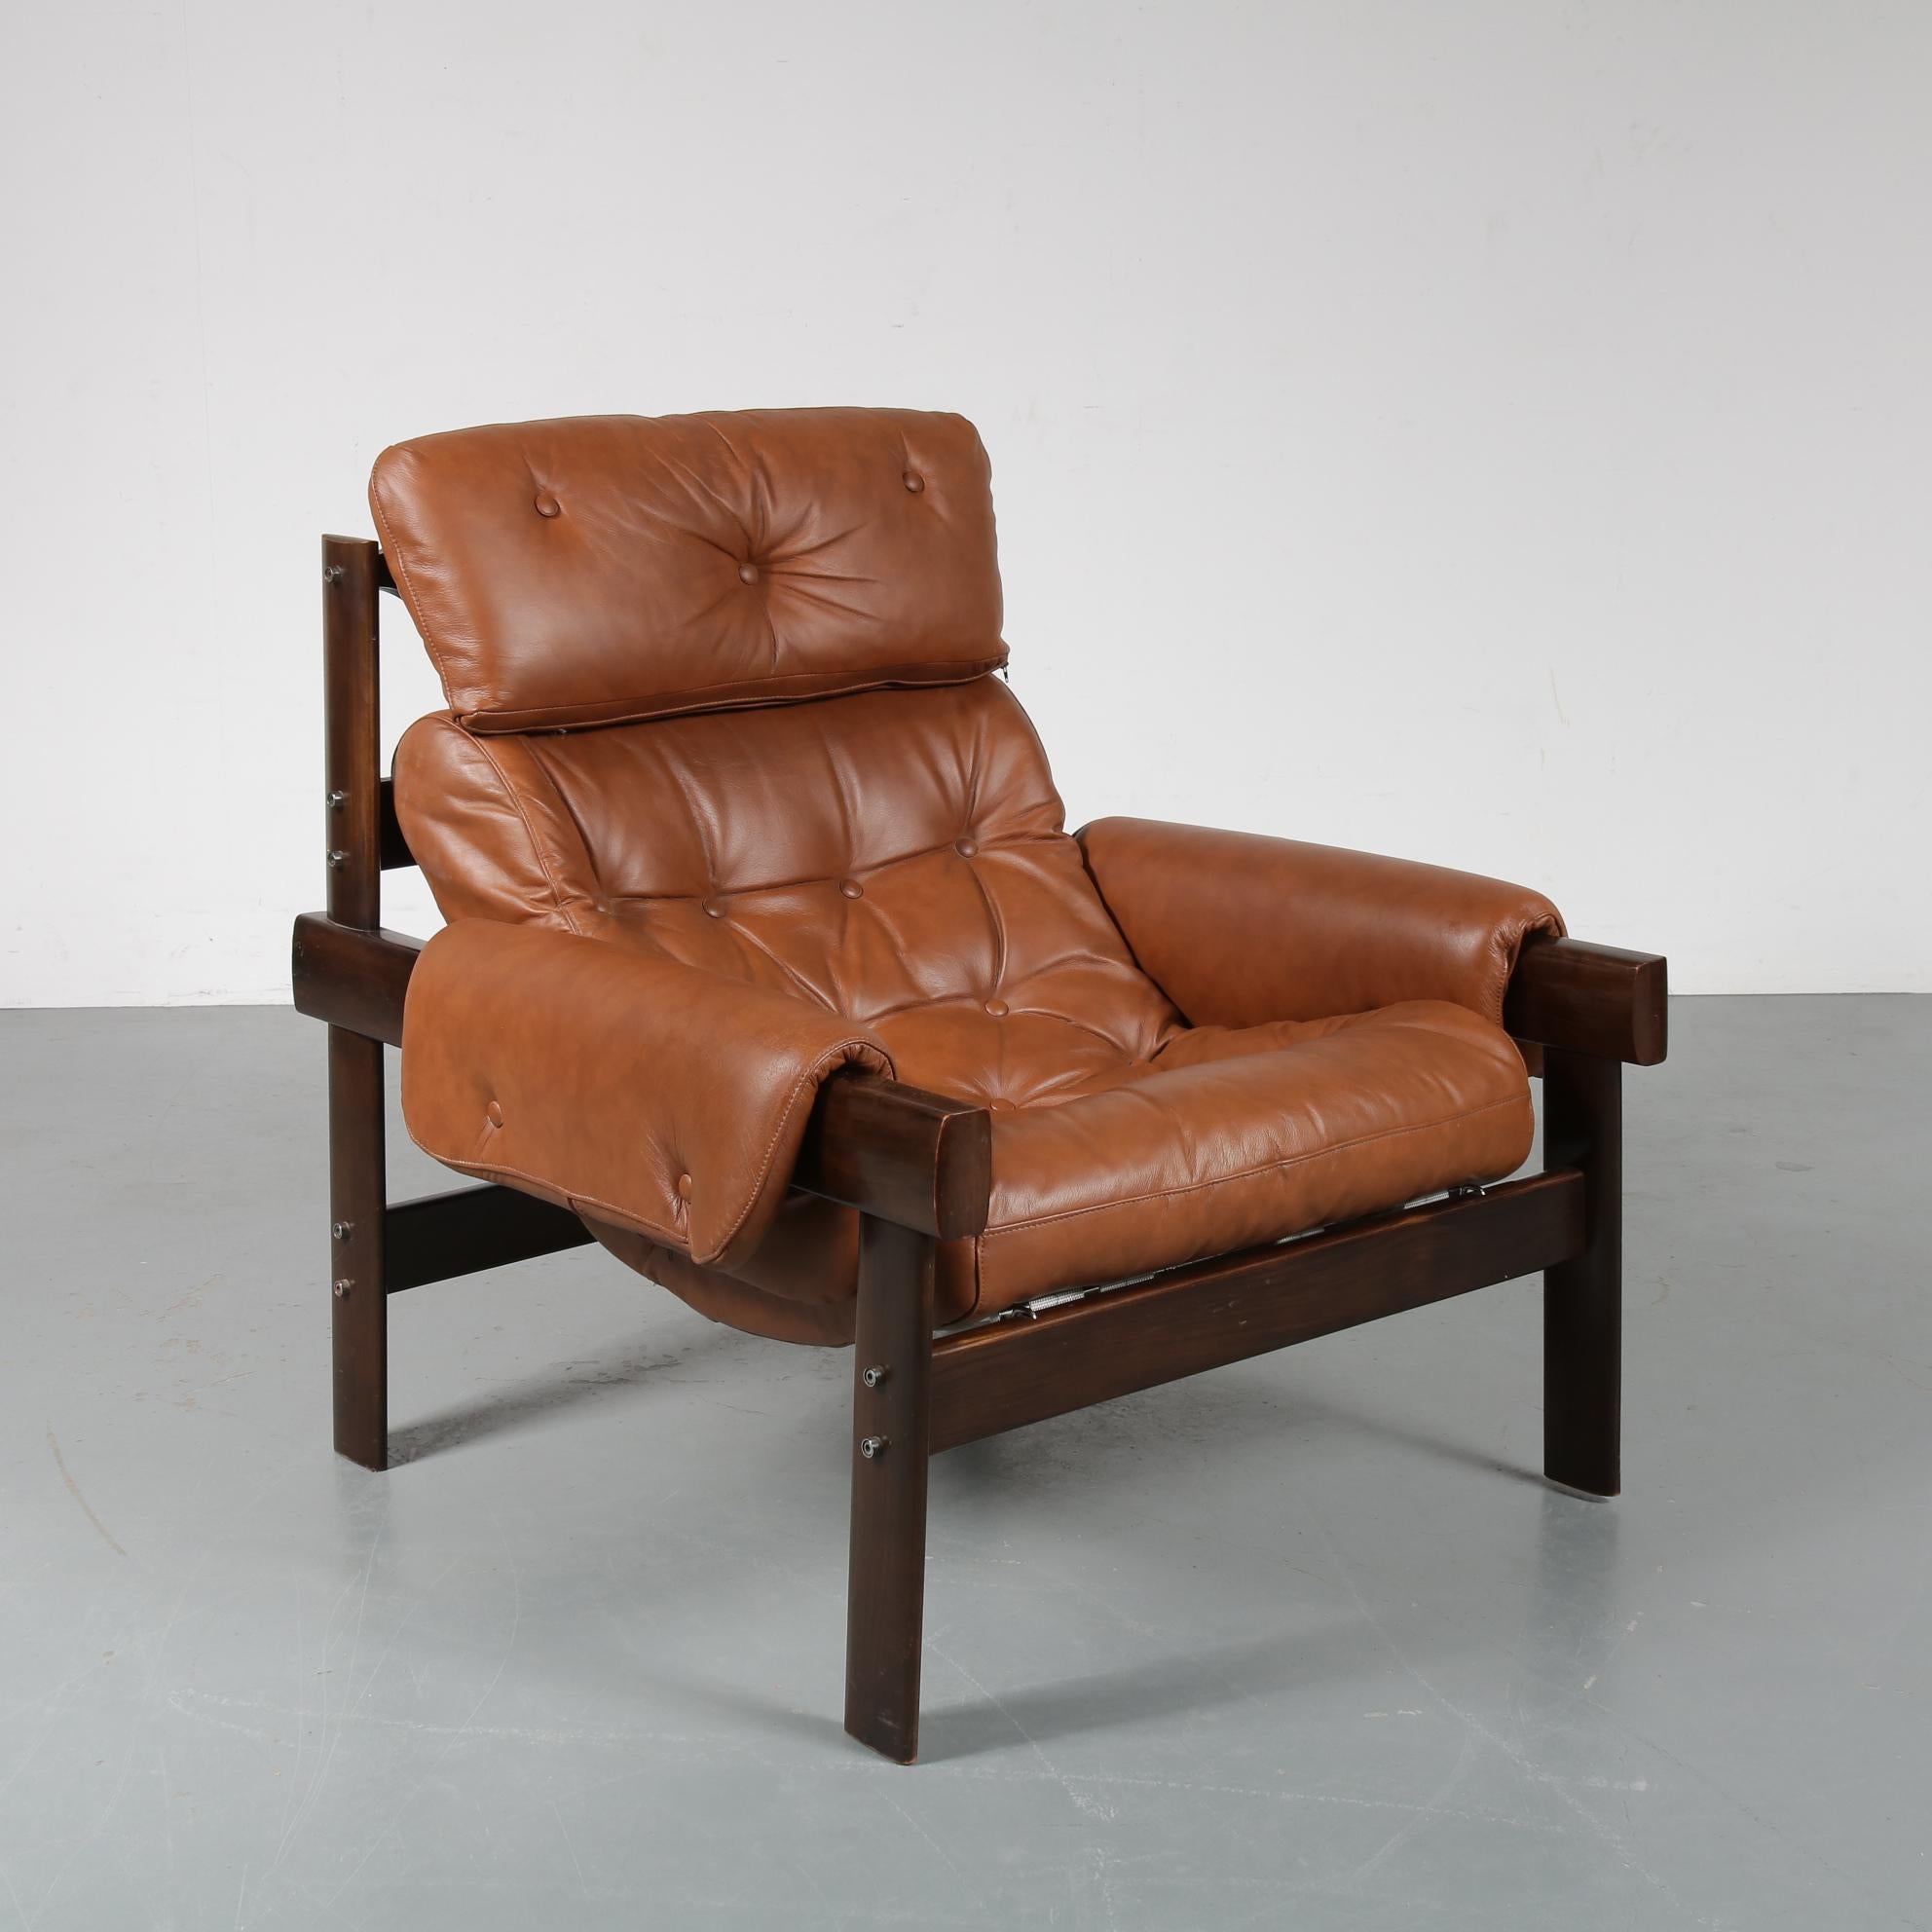 A wonderful lounge chair designed by Percival Lafer, made in Brazil in the 1970s.

This beautiful piece is made of high quality, deep brown Brazilian hardwood. The comfortable seat is upholstered in high quality cognac leather, all together a